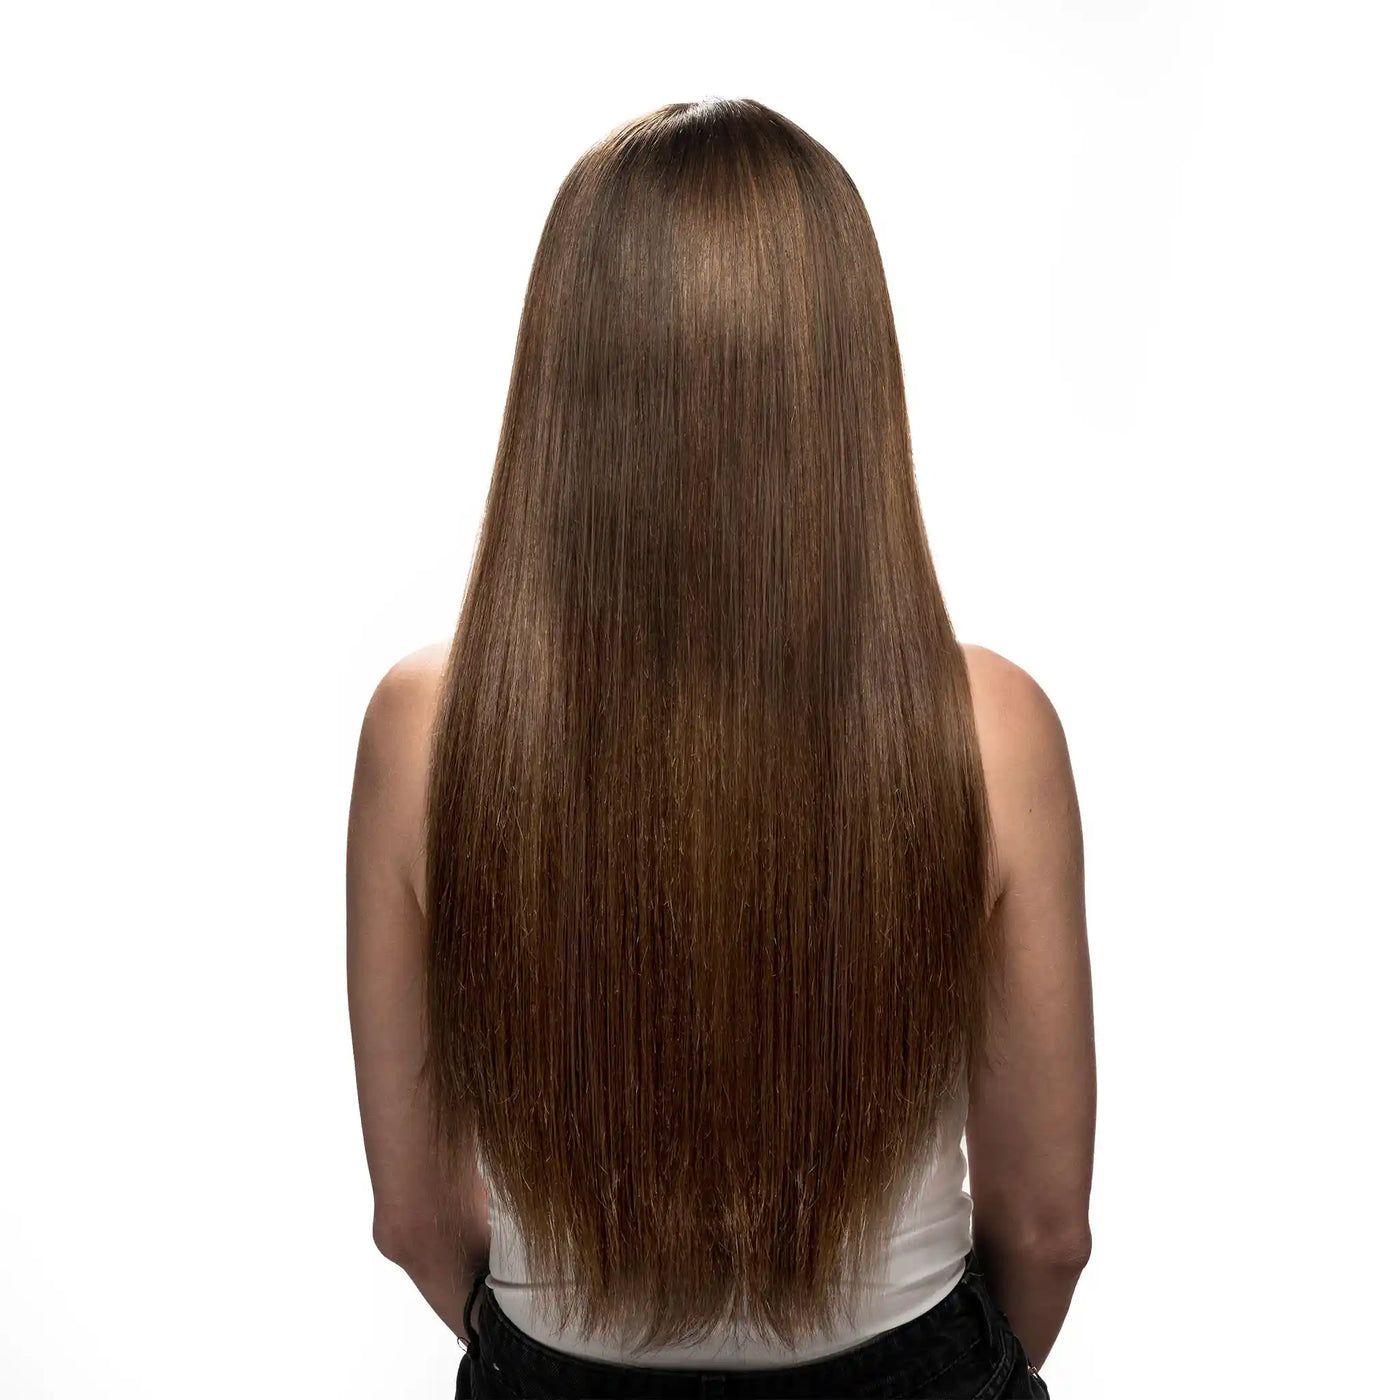 Friends Offer - Clip in Extensions Buy 2, Get 3rd for FREE (20 inch)